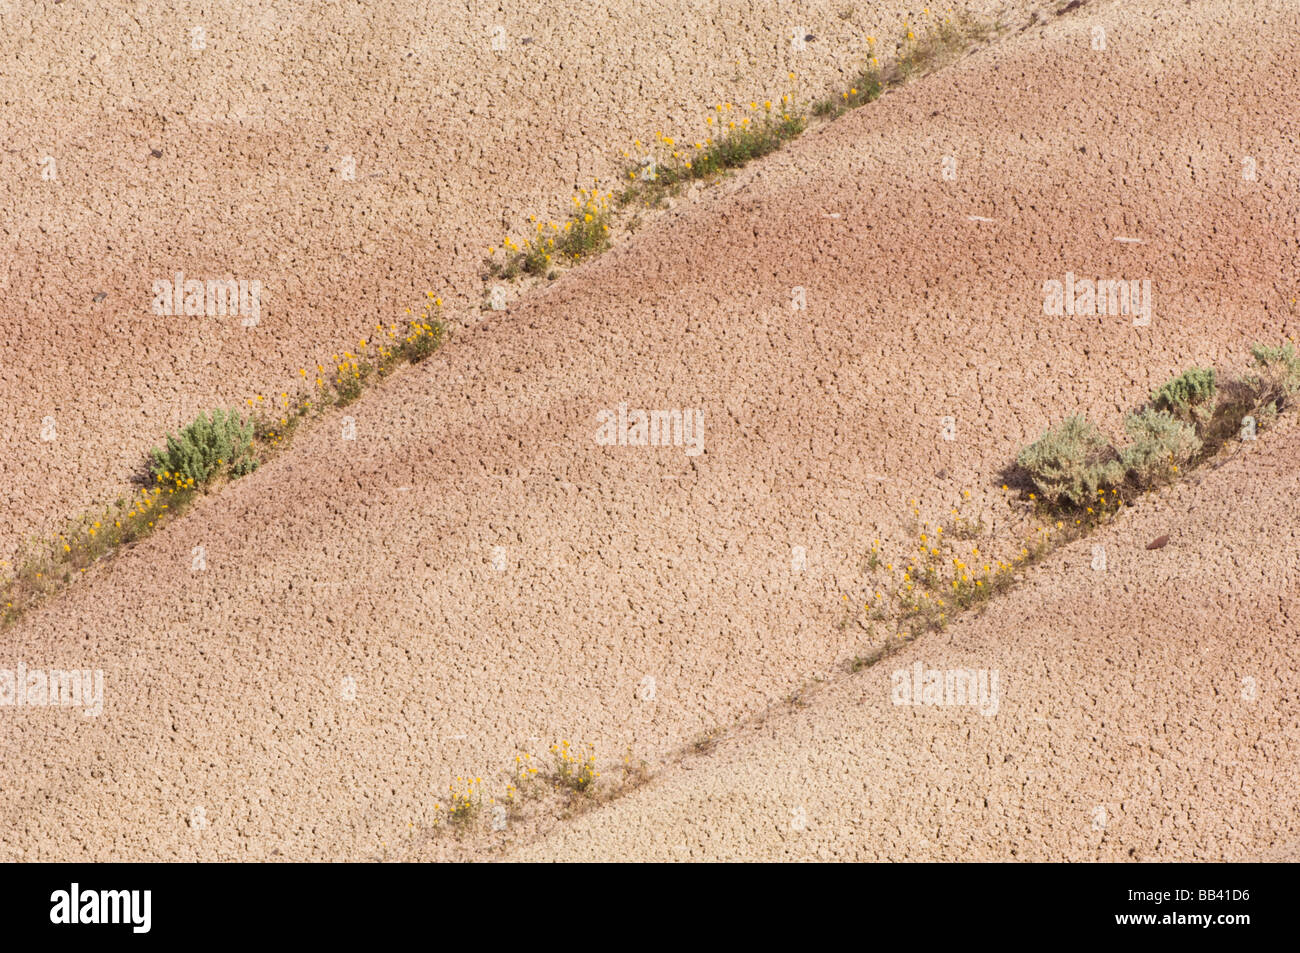 USA, OR, John Day NM, Wild Chaenactis Blooming on the Painted Hills Stock Photo